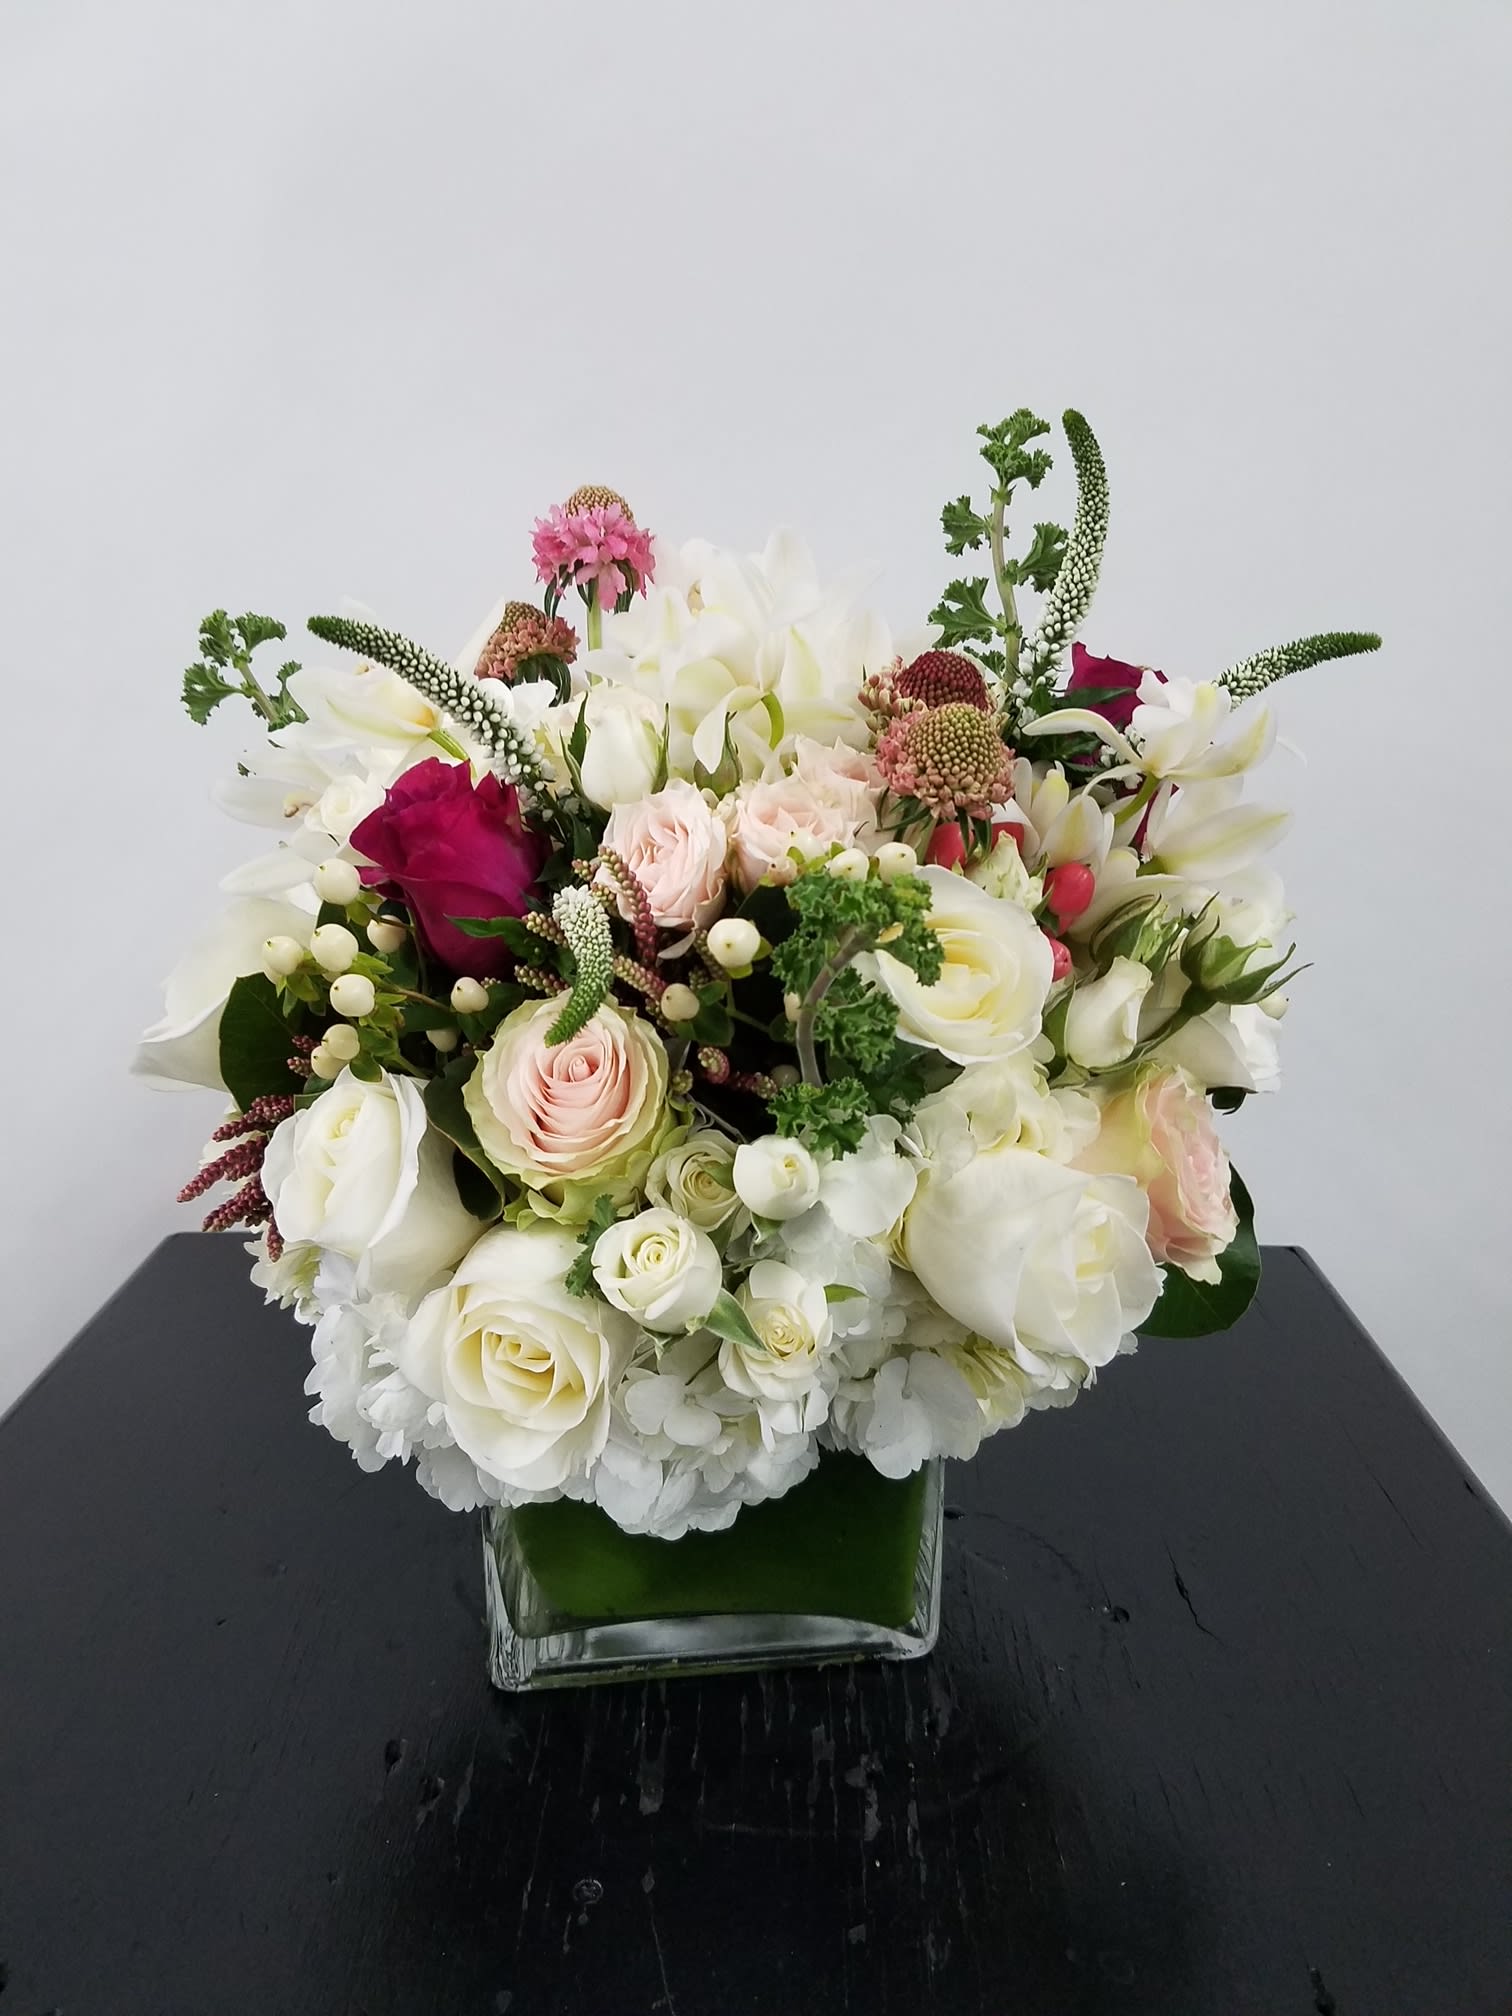 The Chanel of Boxed Flowers - JLF Los Angeles Florist